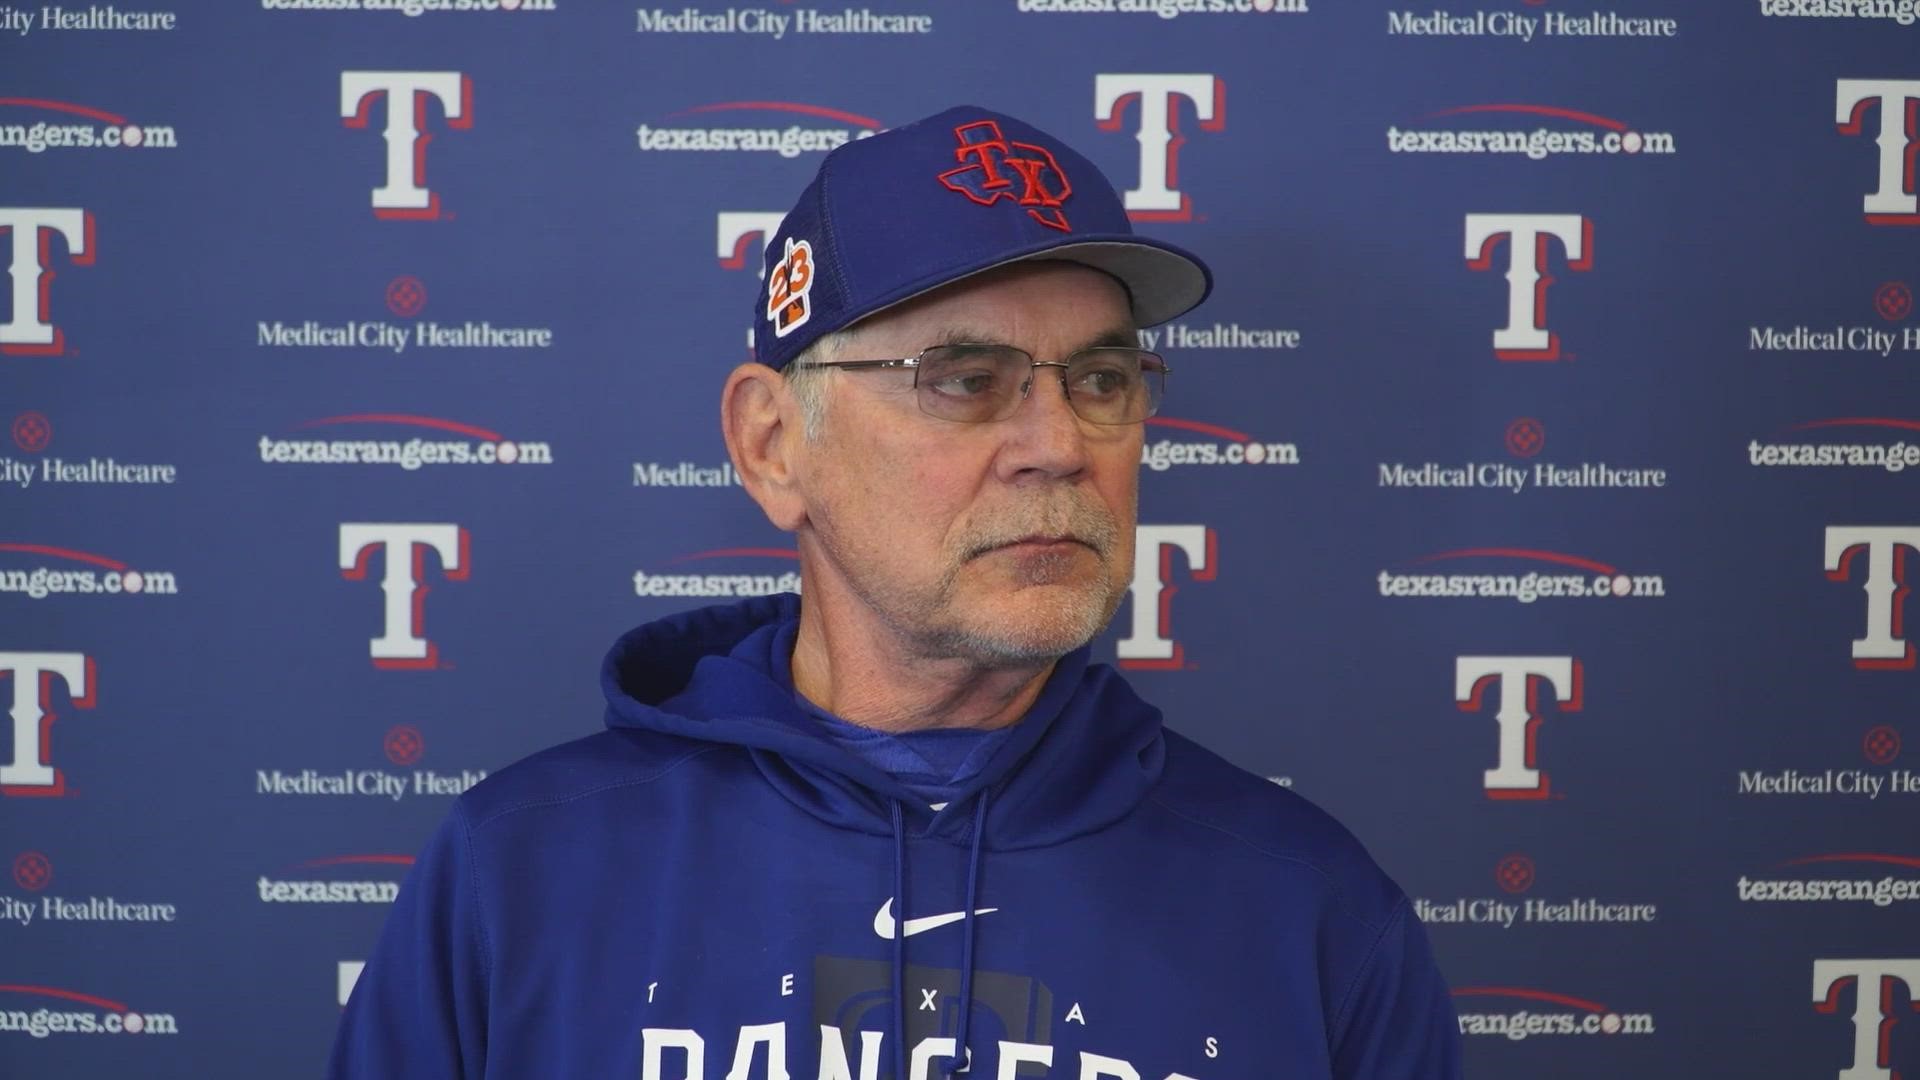 Texas Rangers manager Bruce Bochy gave an update Thursday on all things spring training, as the club prepares for the 2023 season. Video via Texas Rangers.